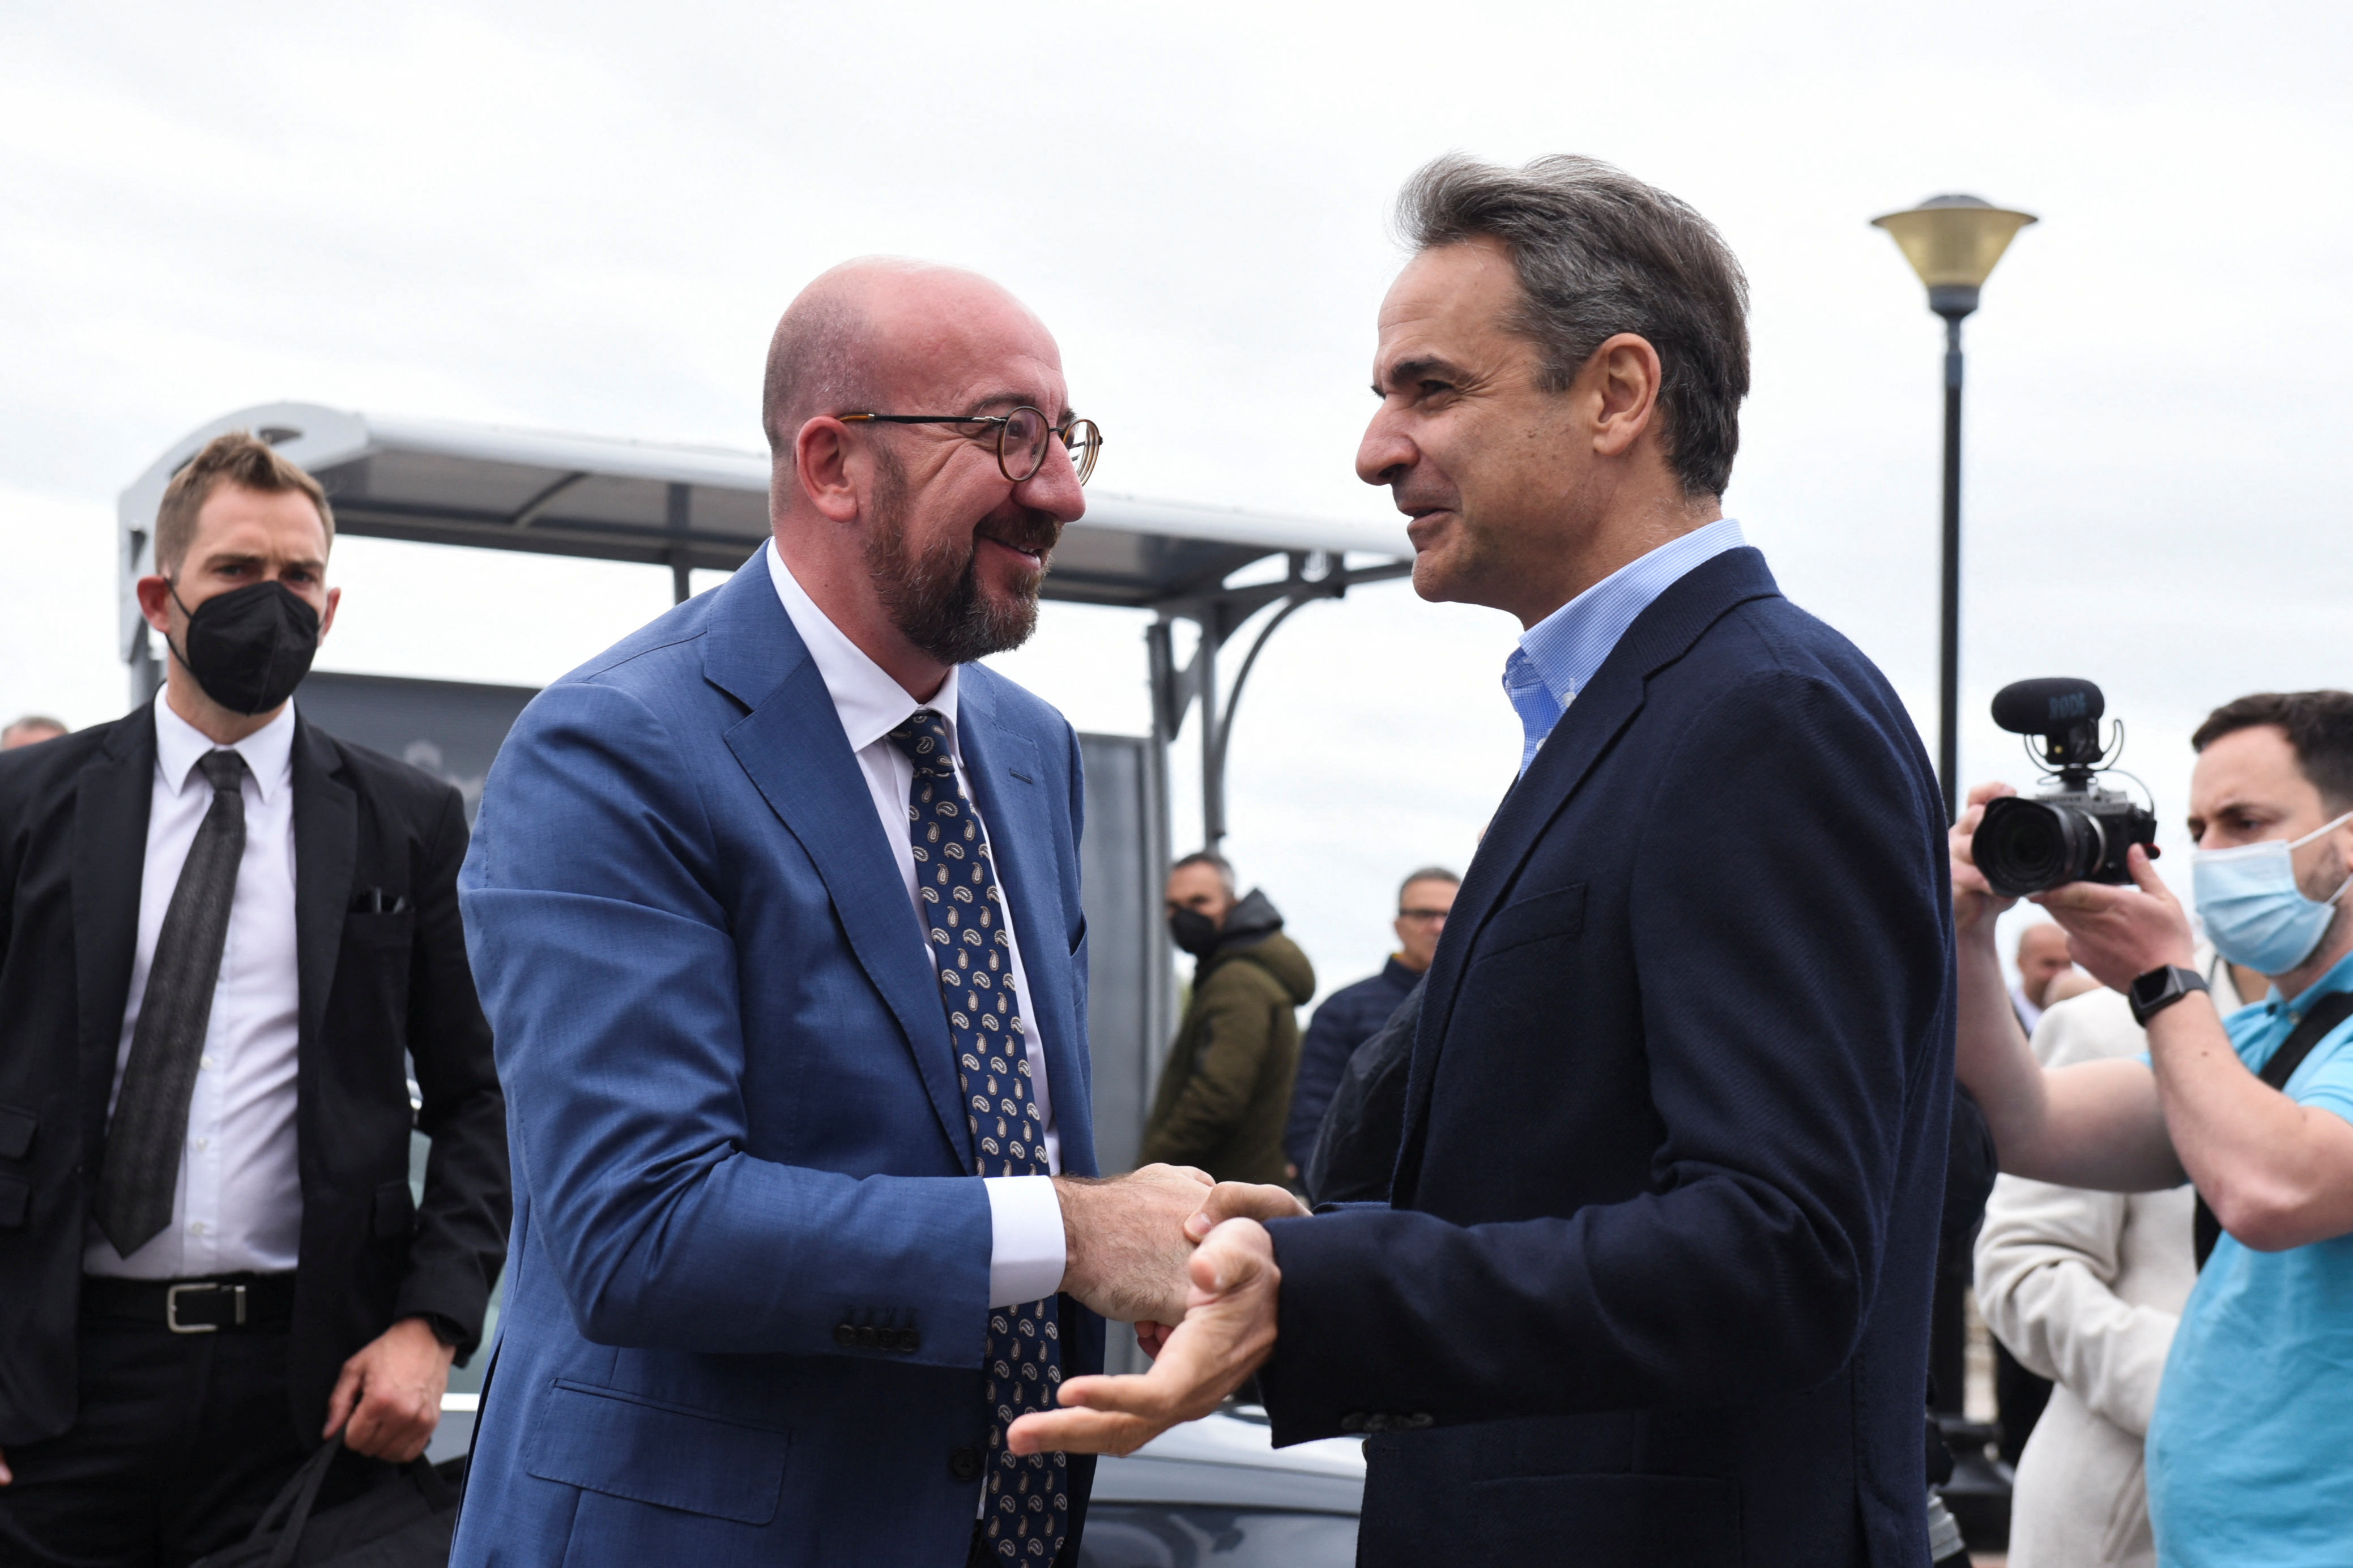 Greek Prime Minister Kyriakos Mitsotakis speaks with the European Council President Charles Michel, during an event in Alexandroupolis